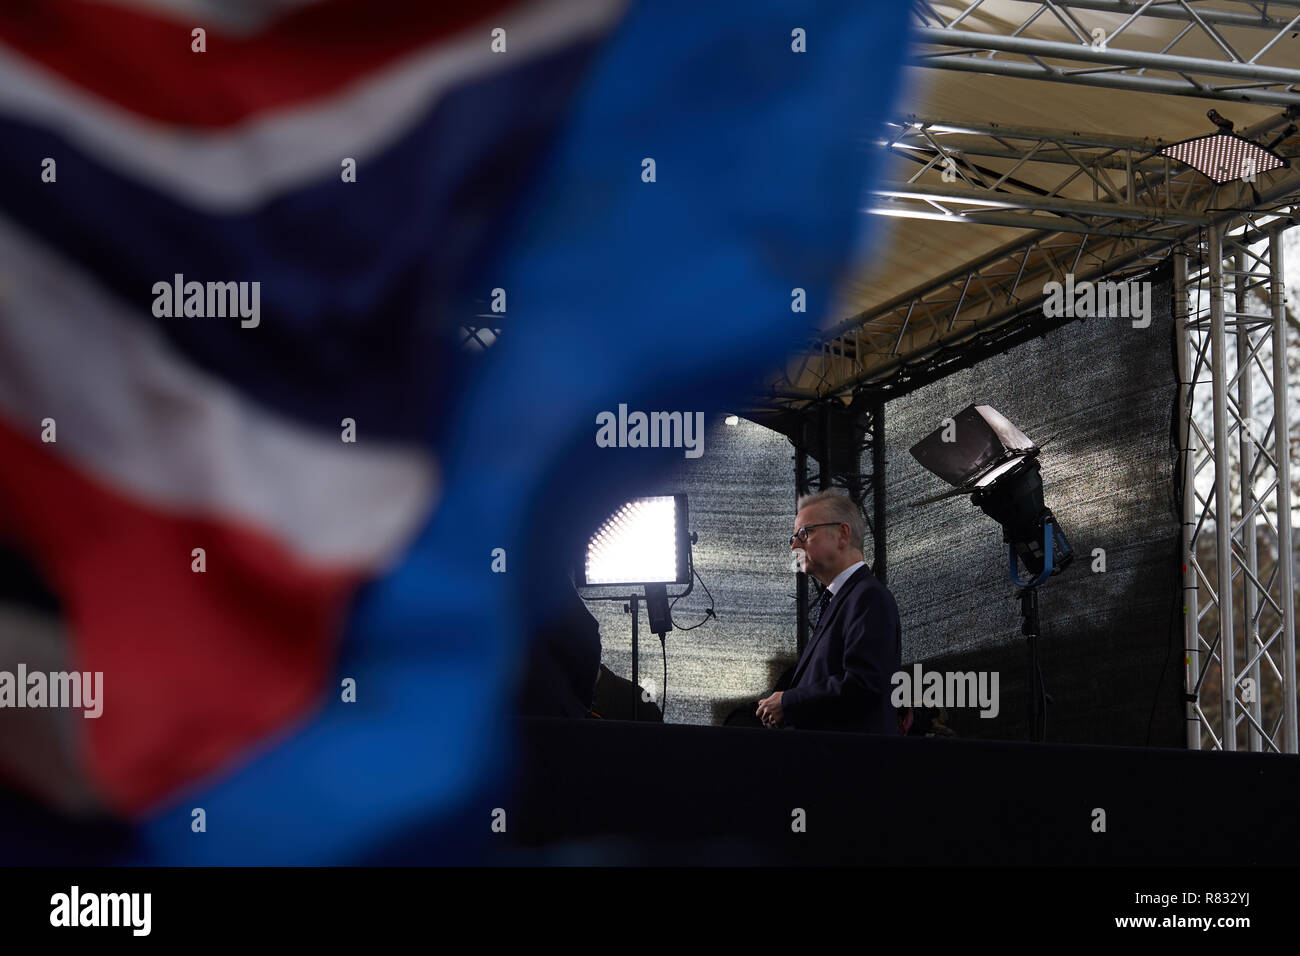 London, UK. - 12th December 2018: Michael Gove, British politician of the Conservative Party being interviewed by media during a day when party members try to oust Theresa May as leader. Credit: Kevin J. Frost/Alamy Live News Stock Photo